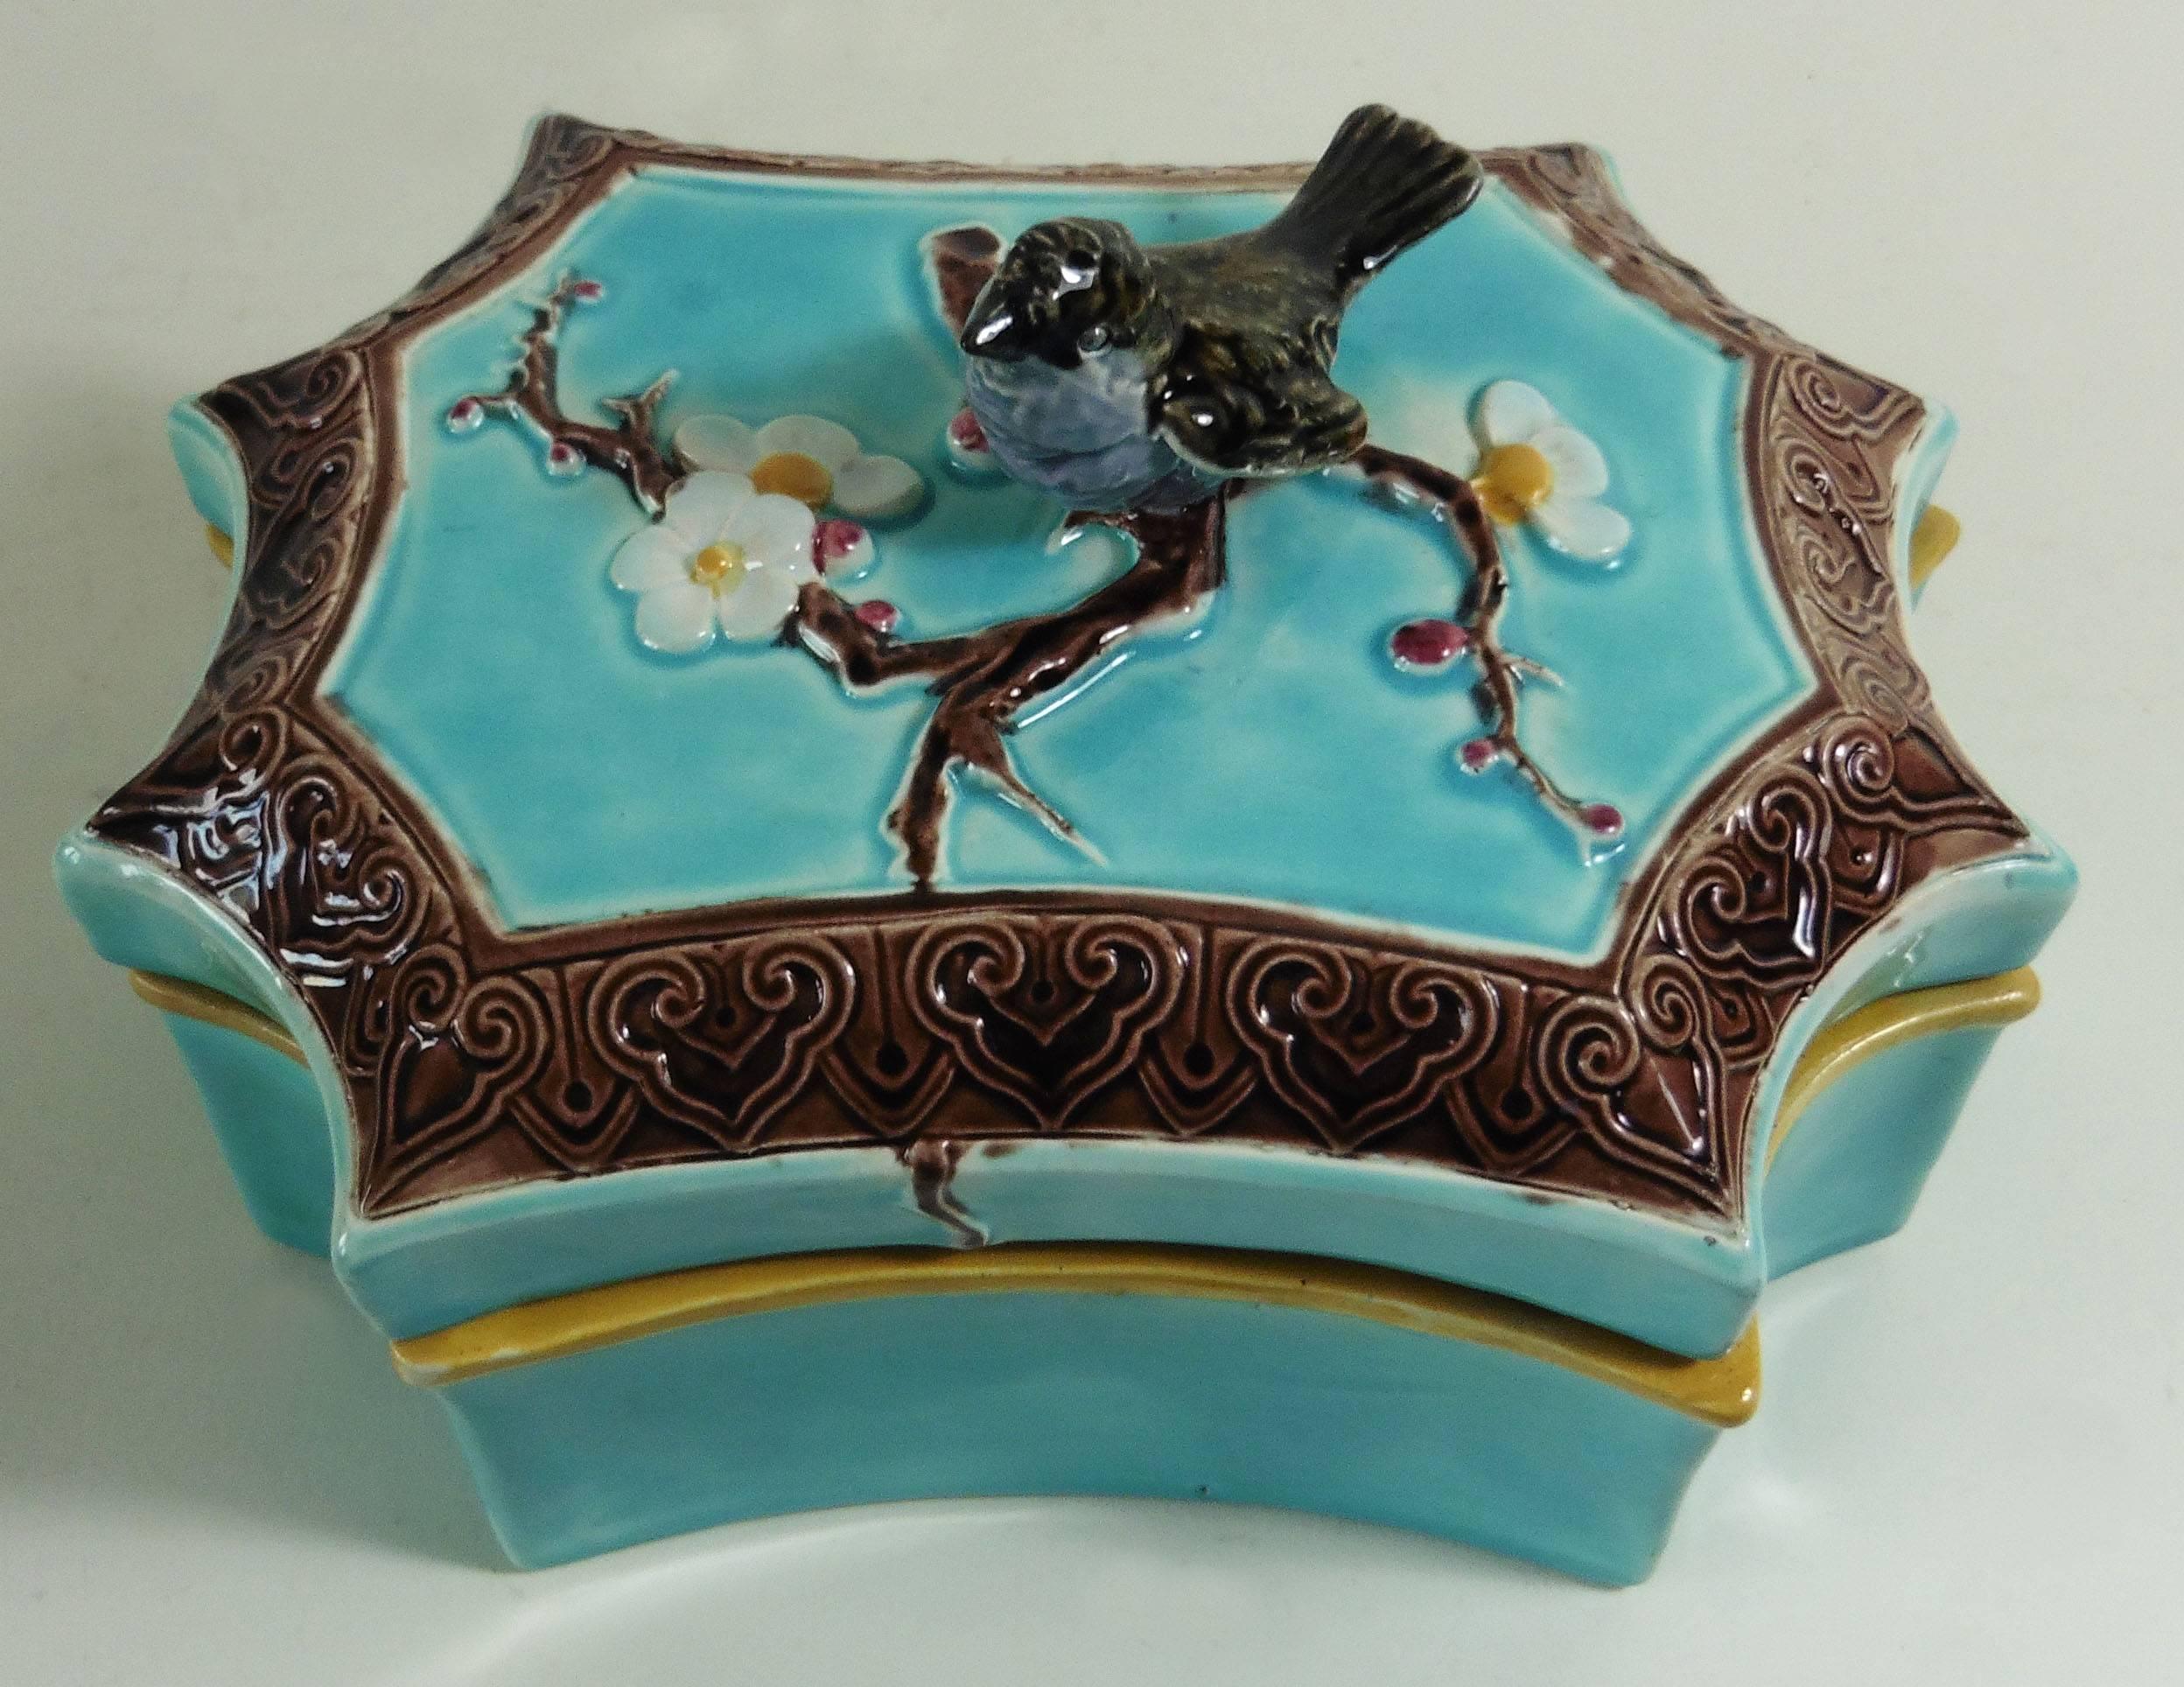 19th century Victorian Majolica turquoise box with a bird handle and white flowers attributed to Joseph Holdcroft.
Very rare shape box.
                   